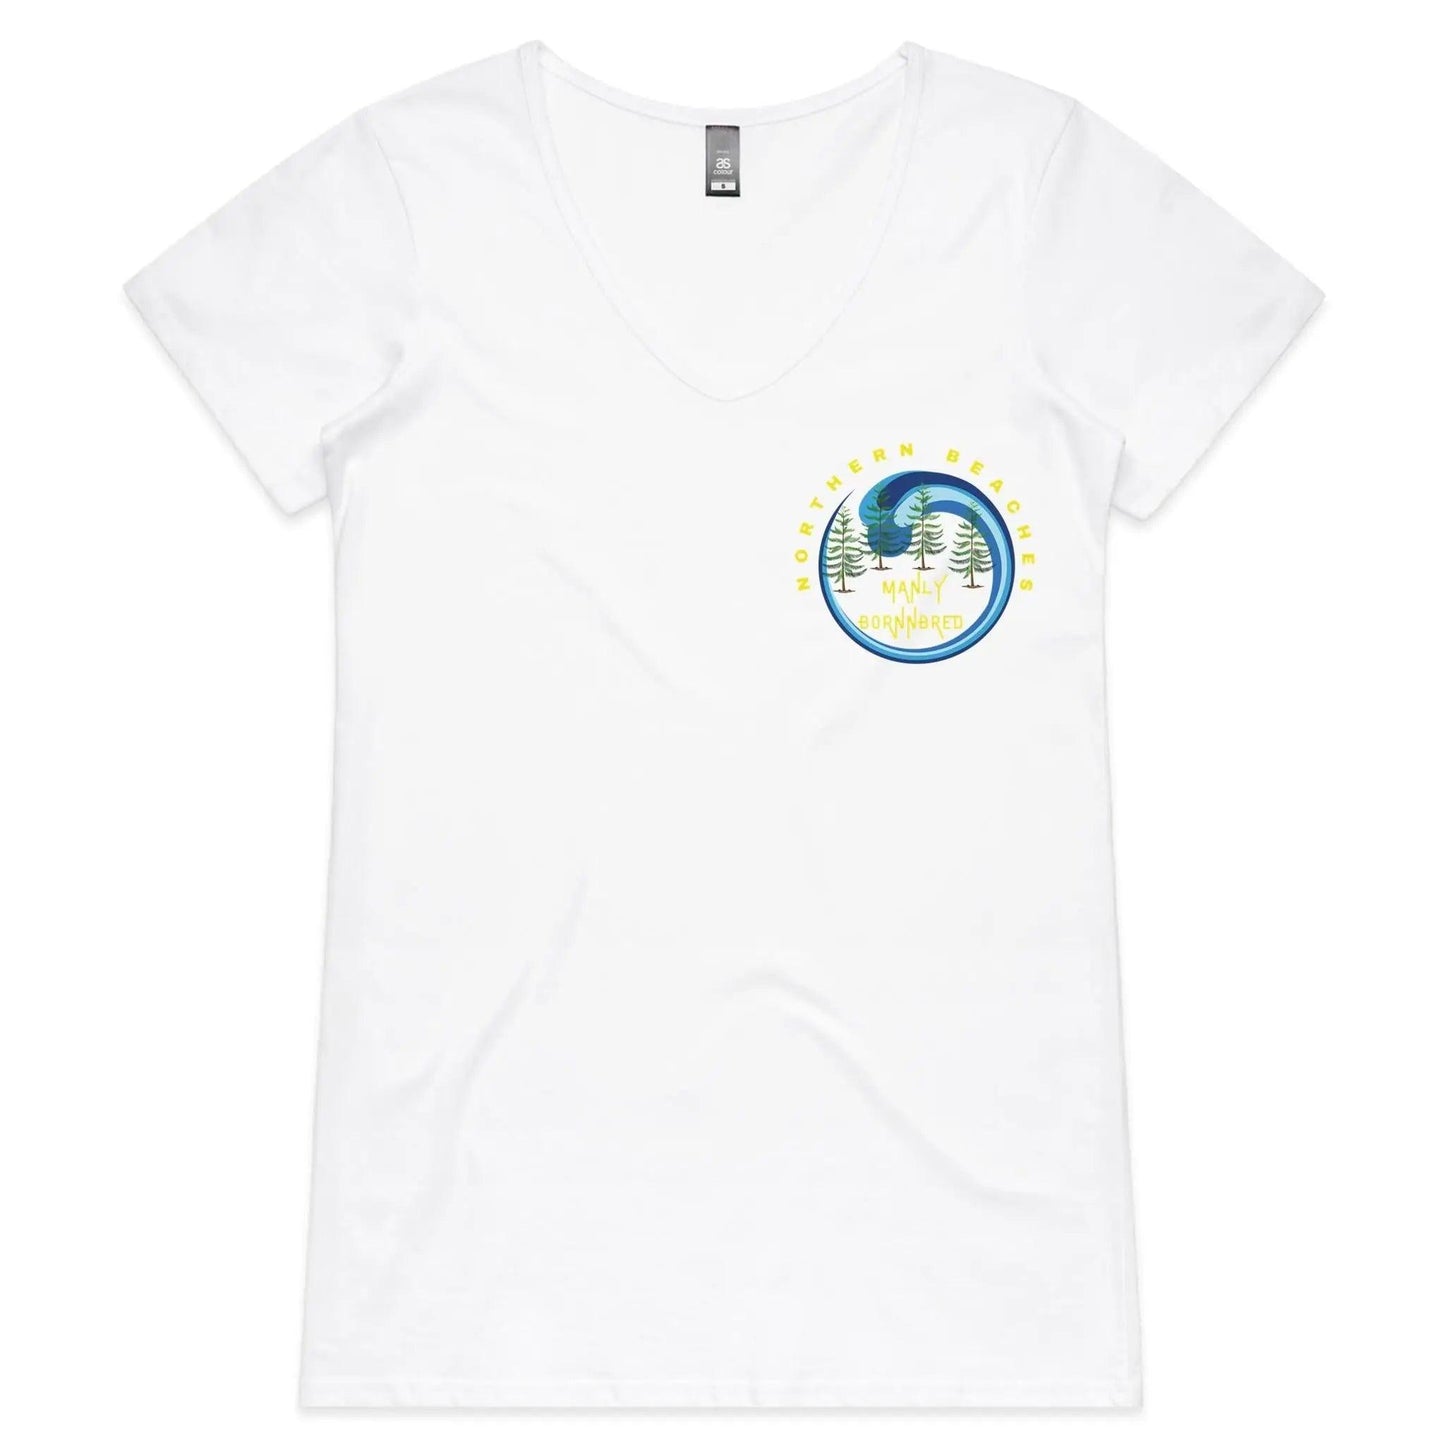 Women´s V-Neck T-Shirt - small logo on front yellow font on white or black tee - Northern Beaches Manly BornNBred